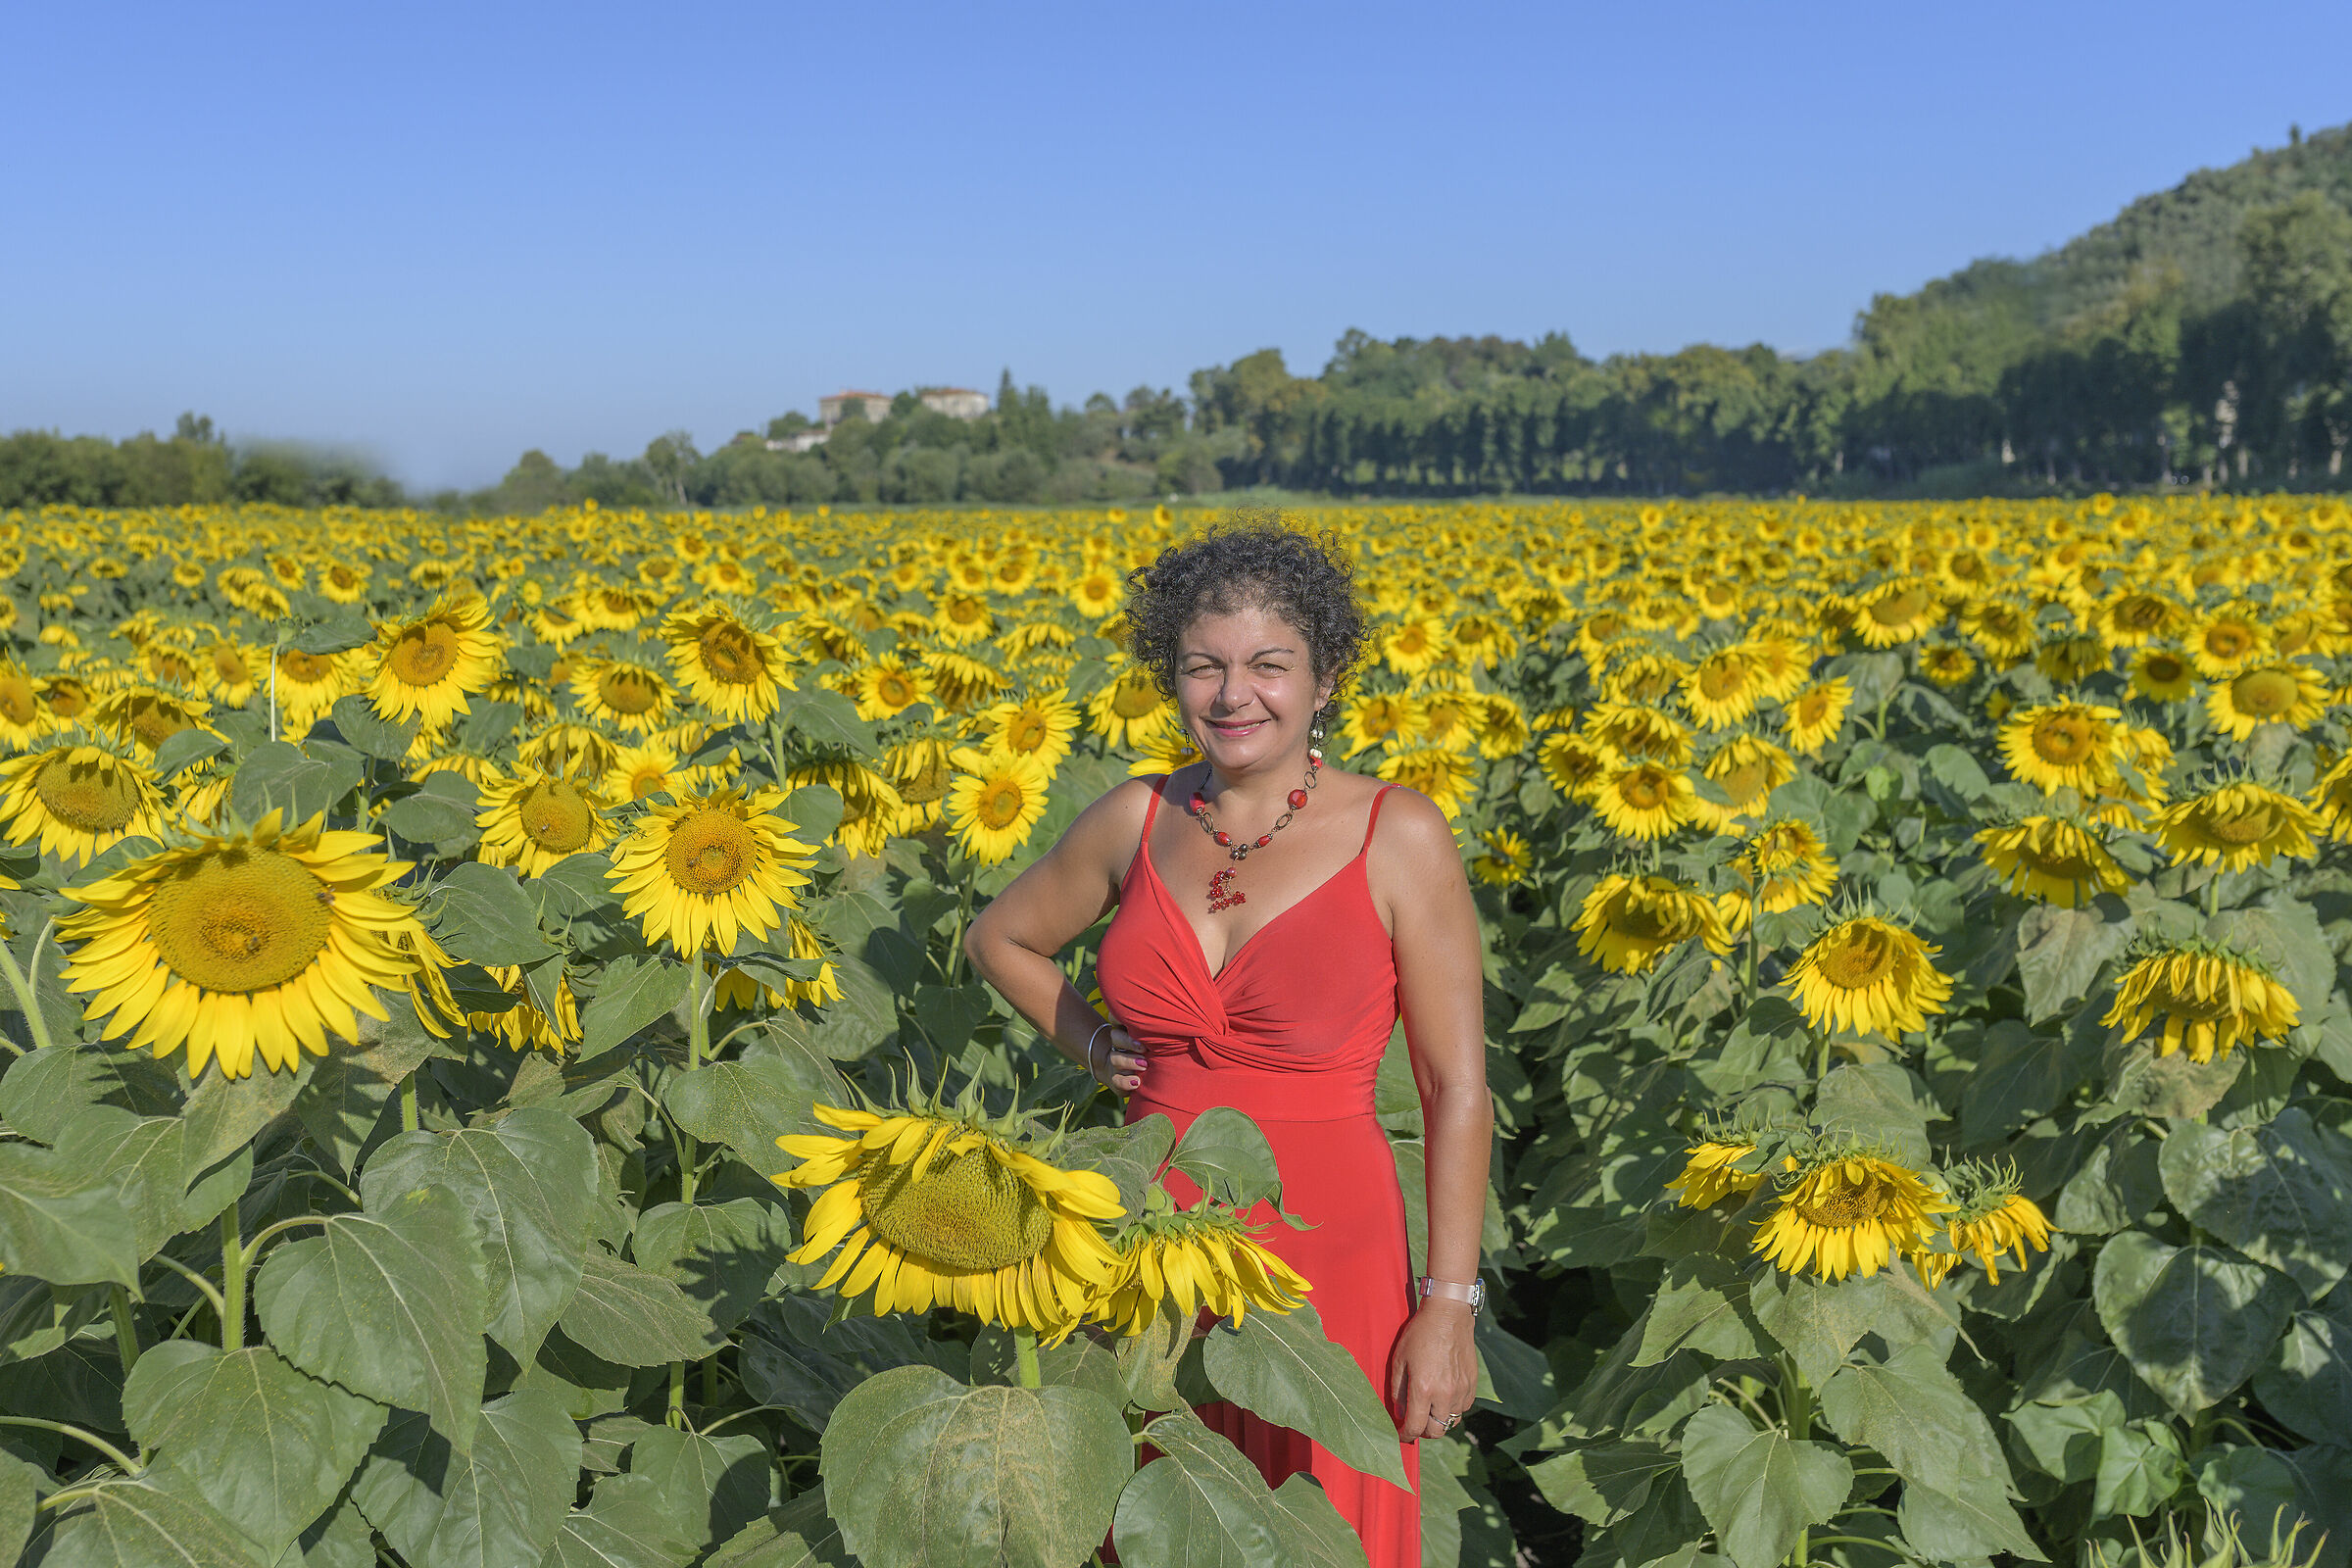 Wife and sunflowers...